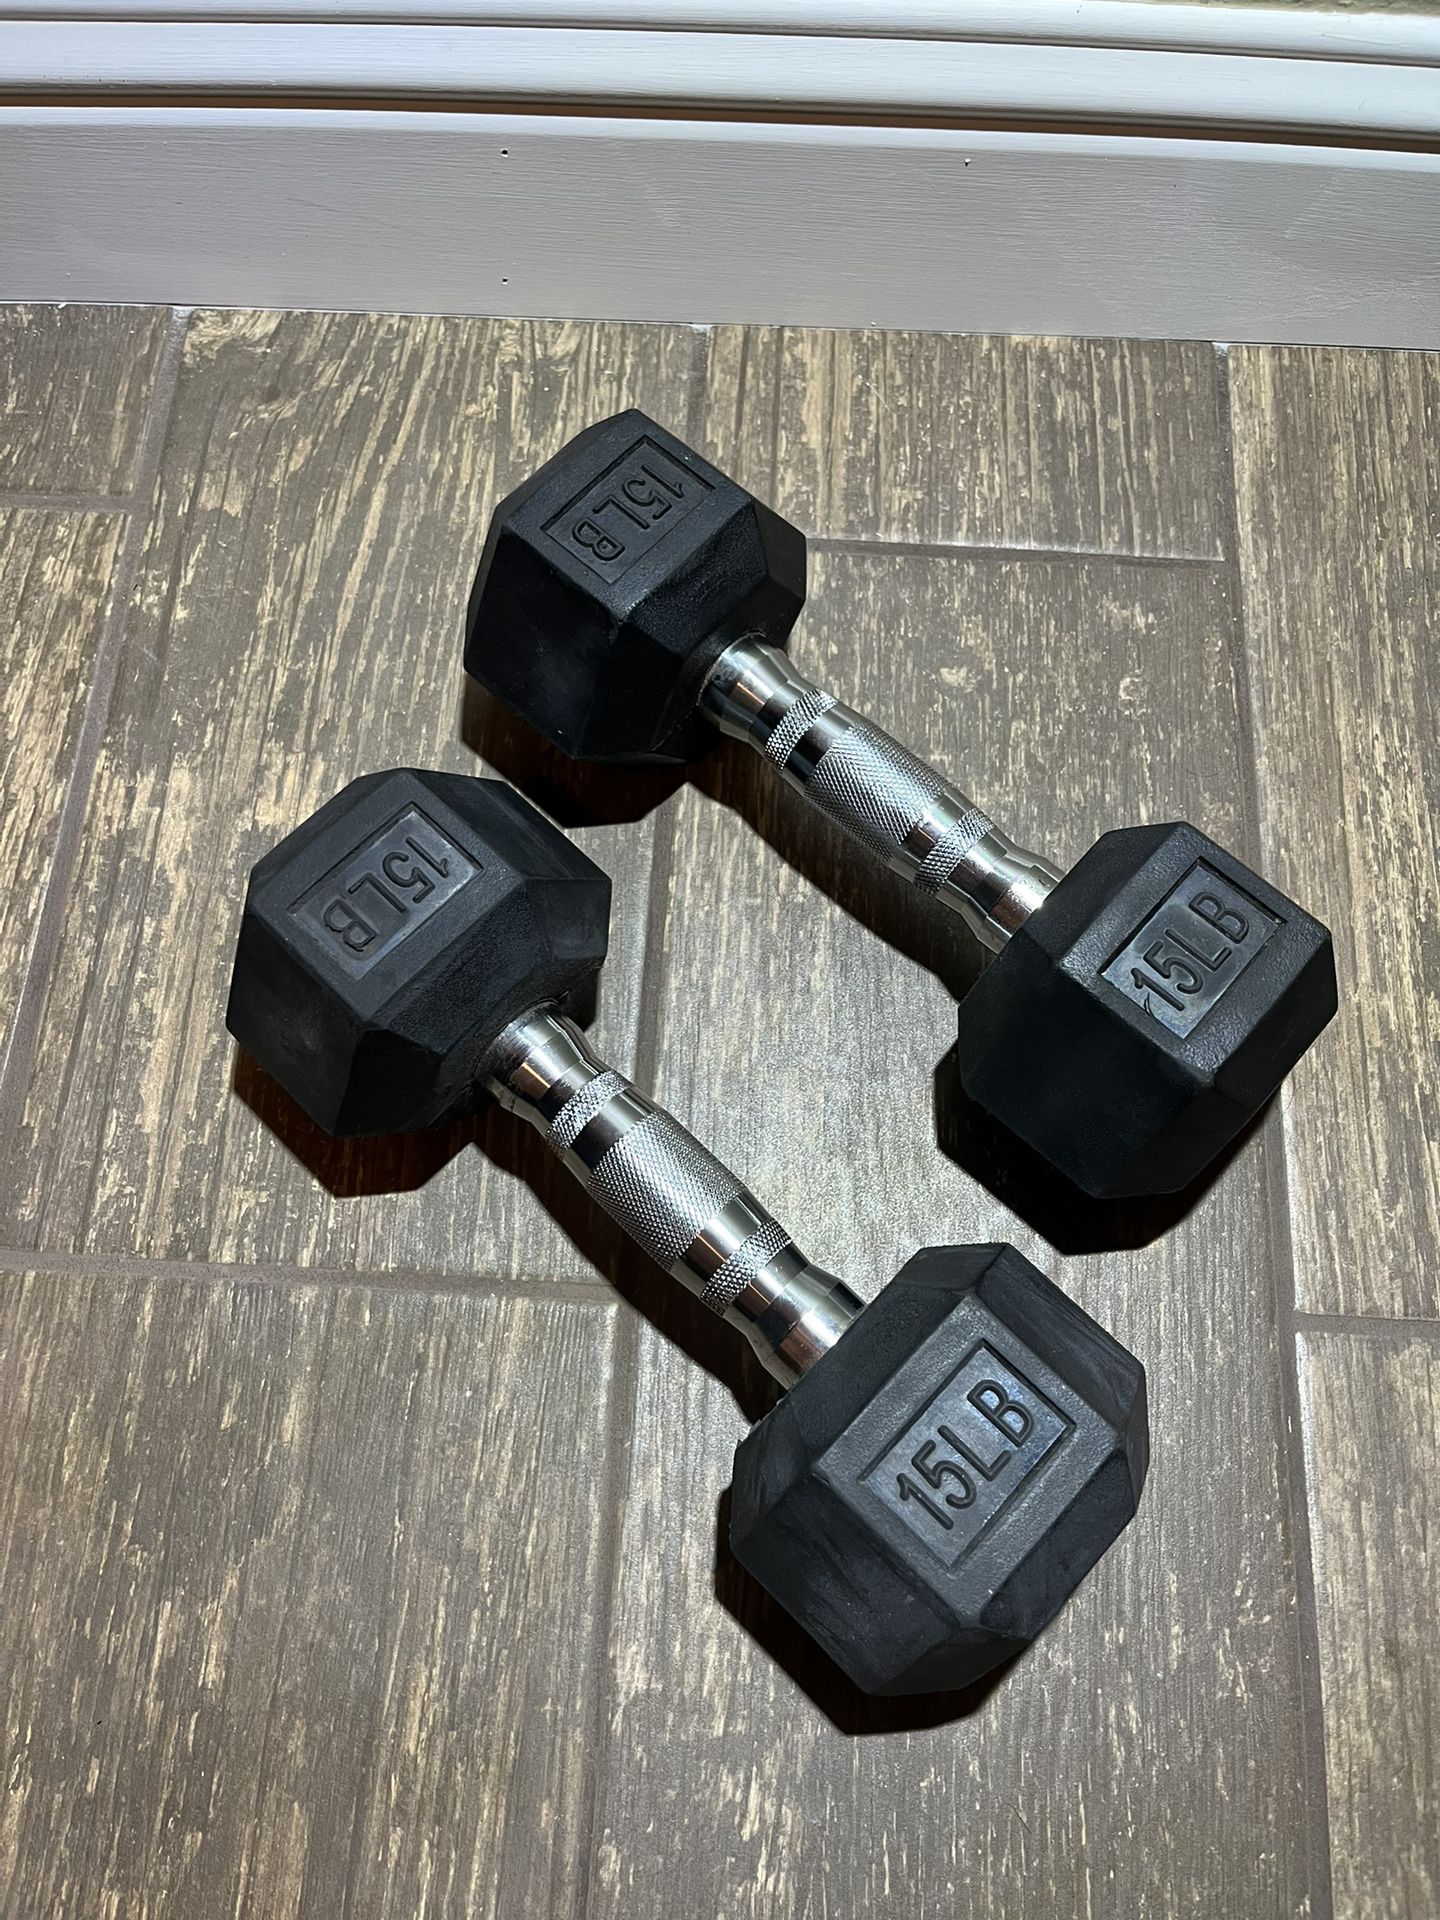 Rubber Coated Dumbbell Set - 15 lbs 